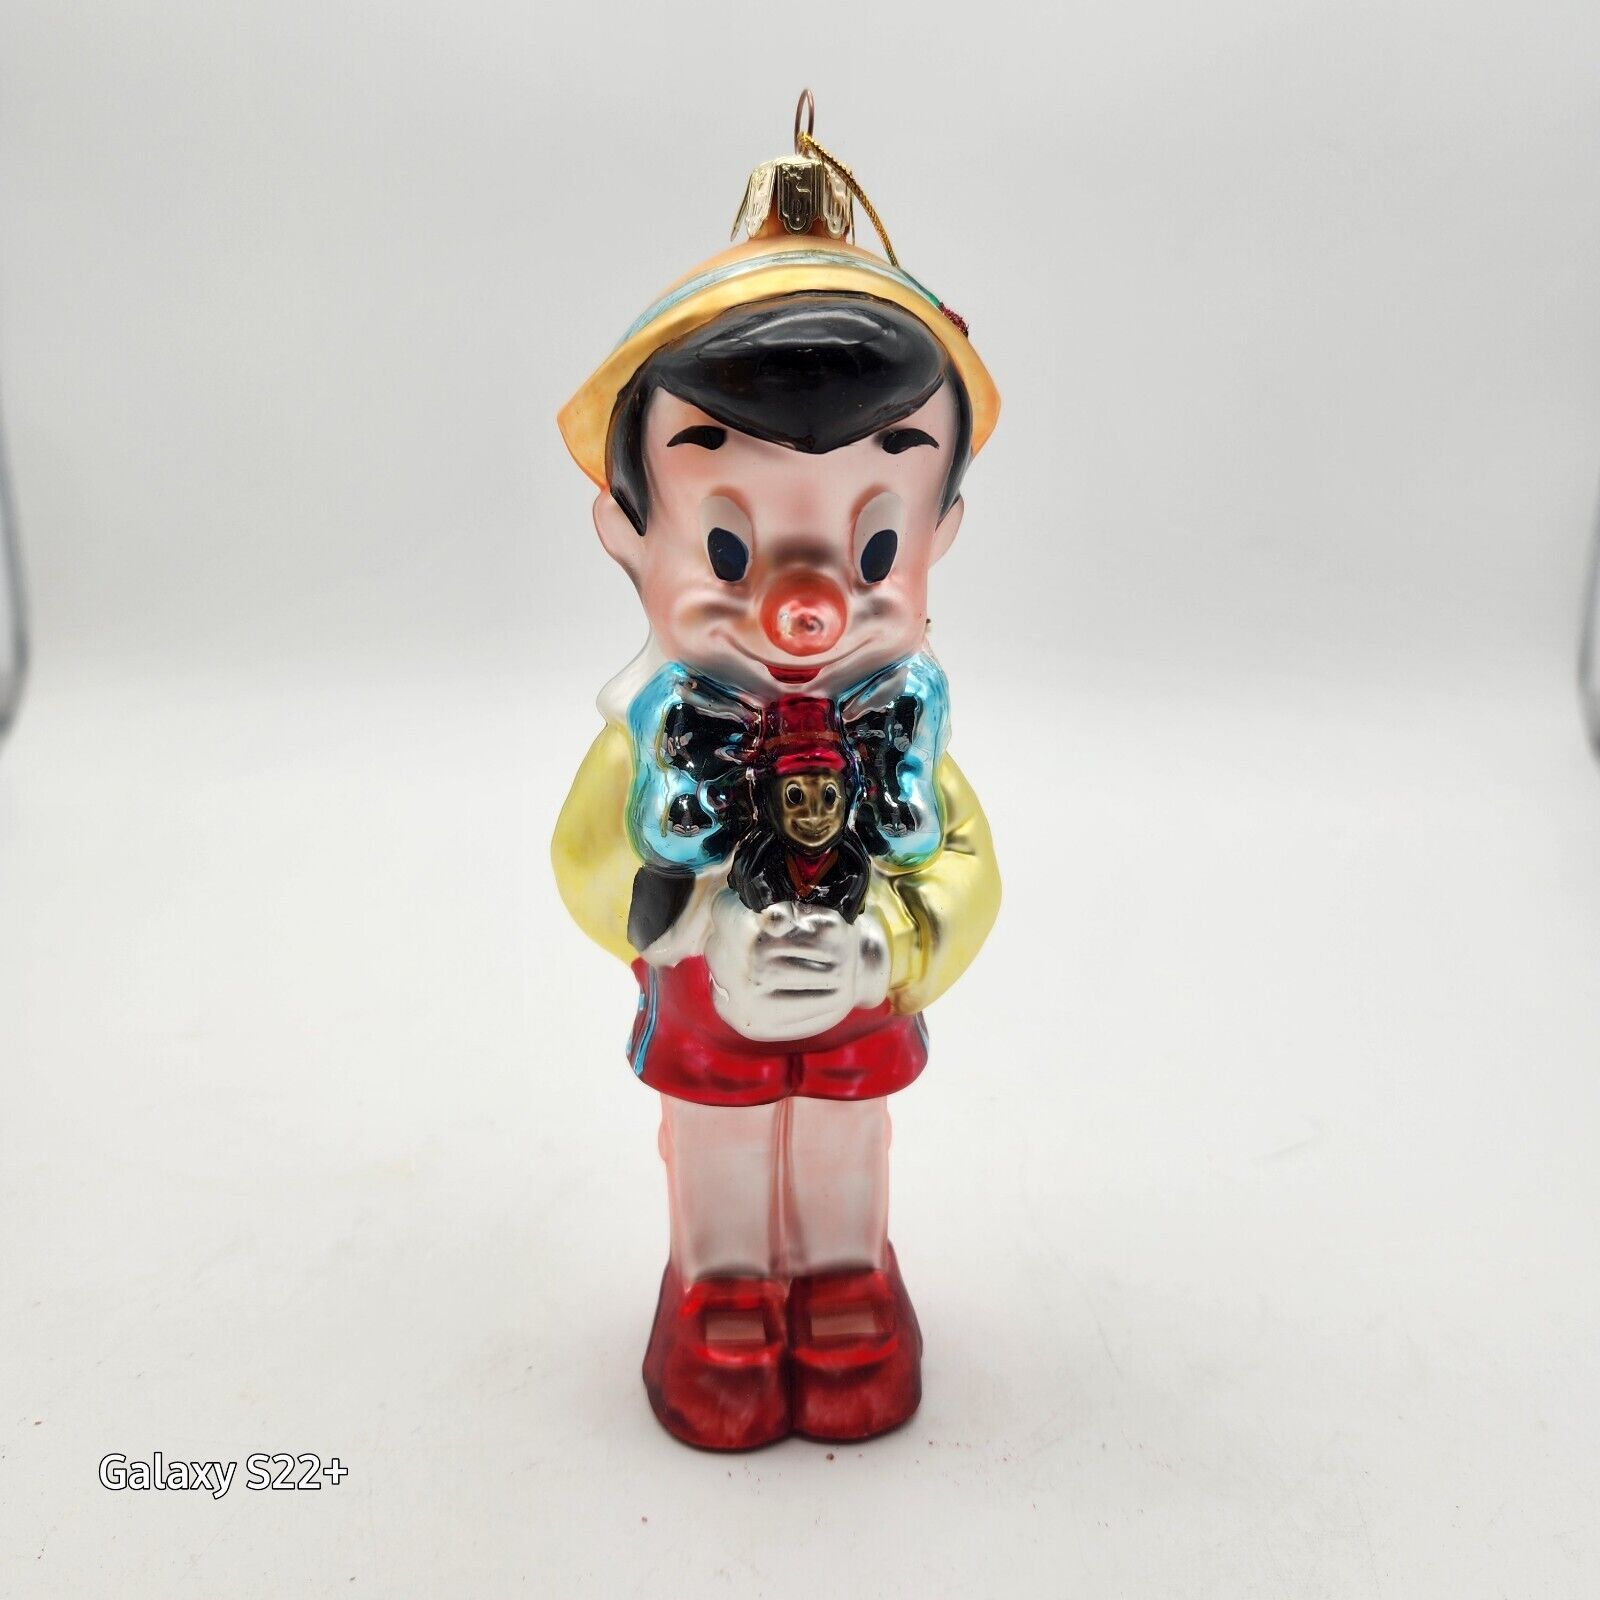 Vintage Disney Glass Ornament Classic Pinocchio Mouthblown Handcrafted